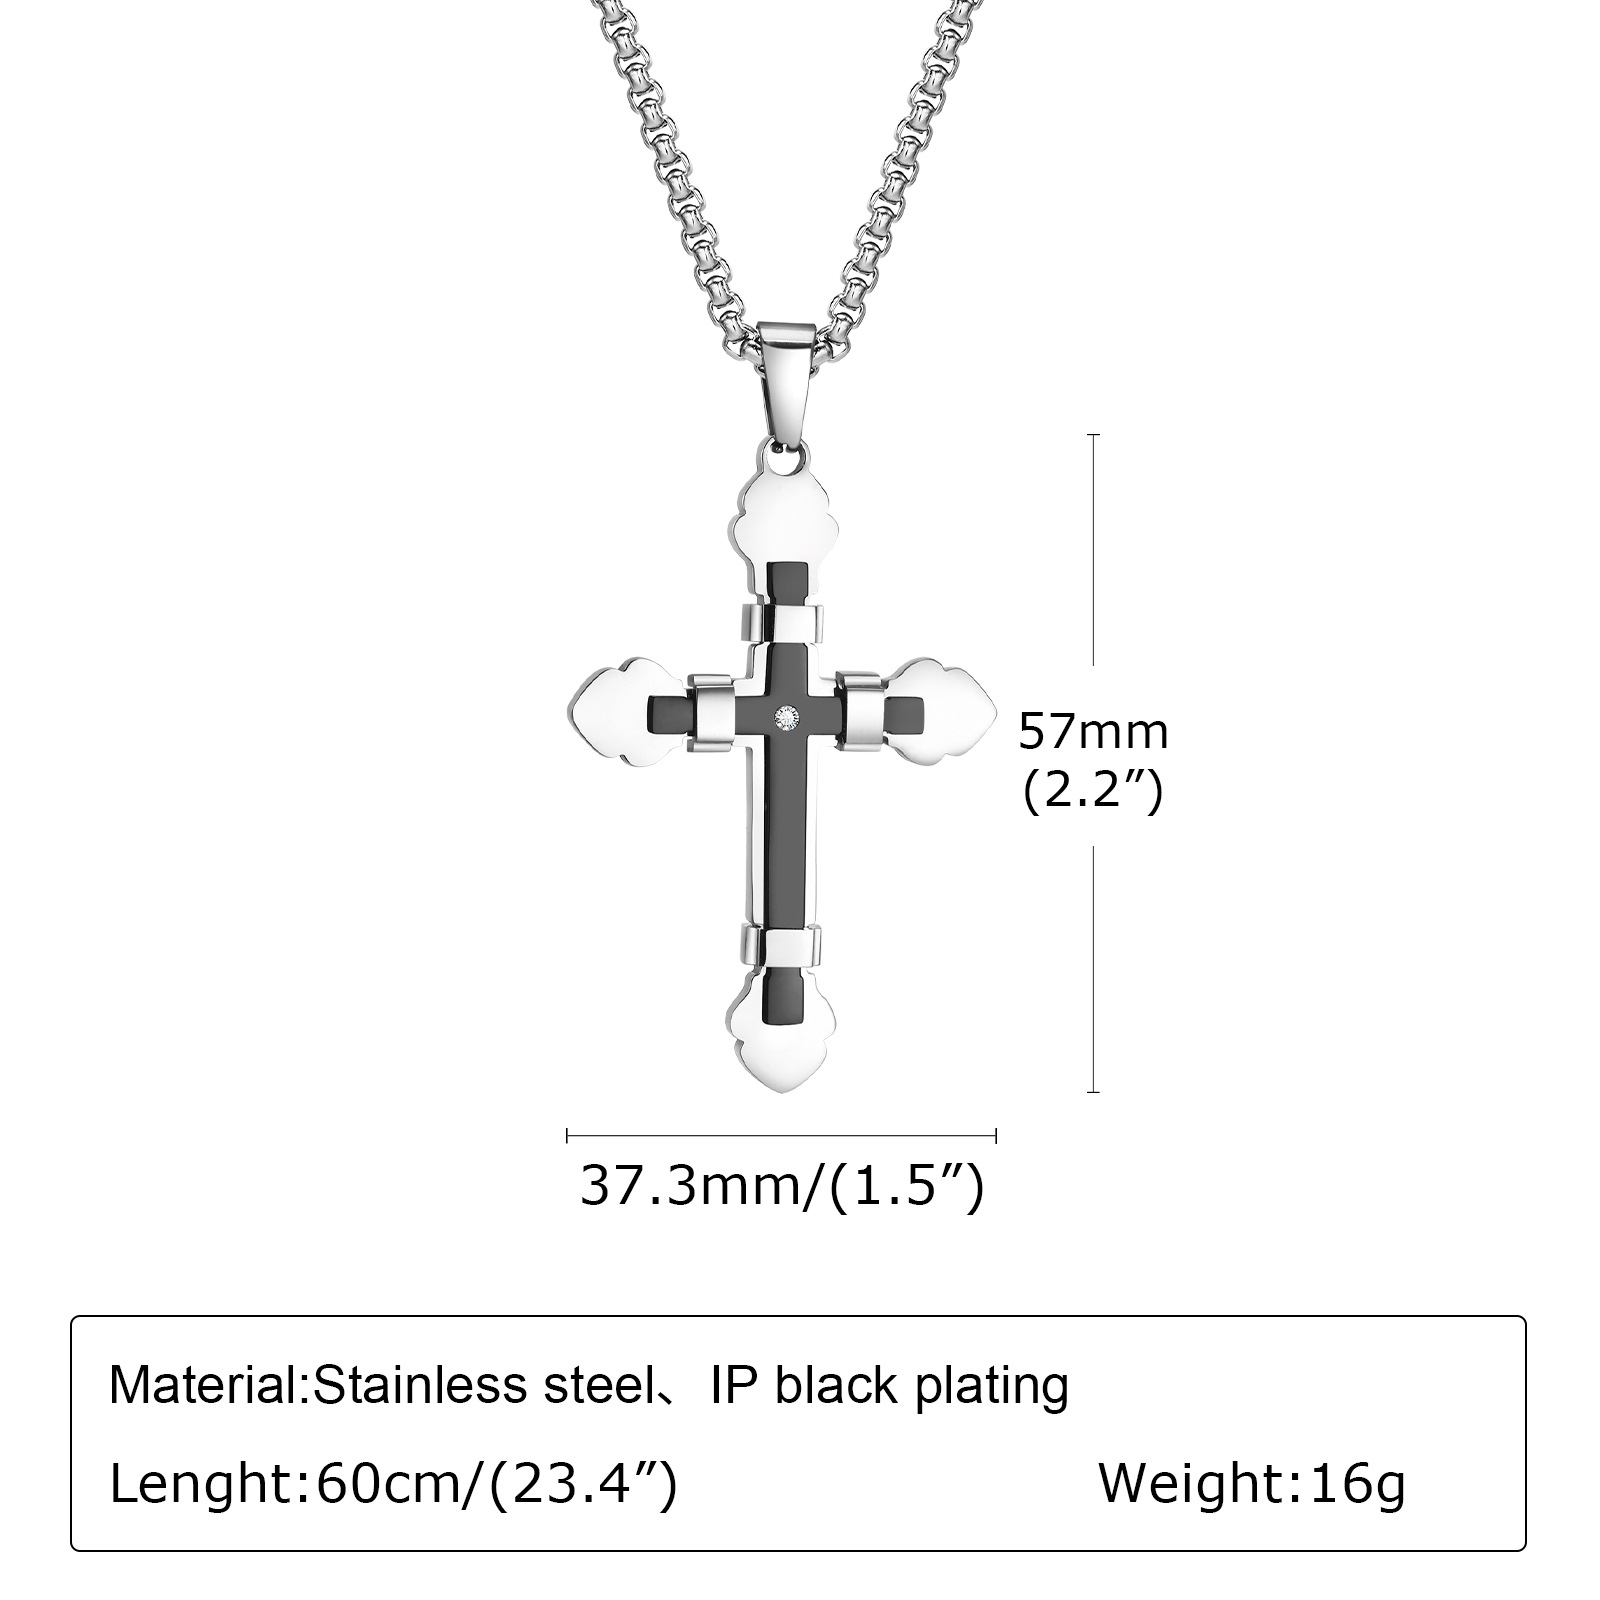 The pendant does not contain a chain